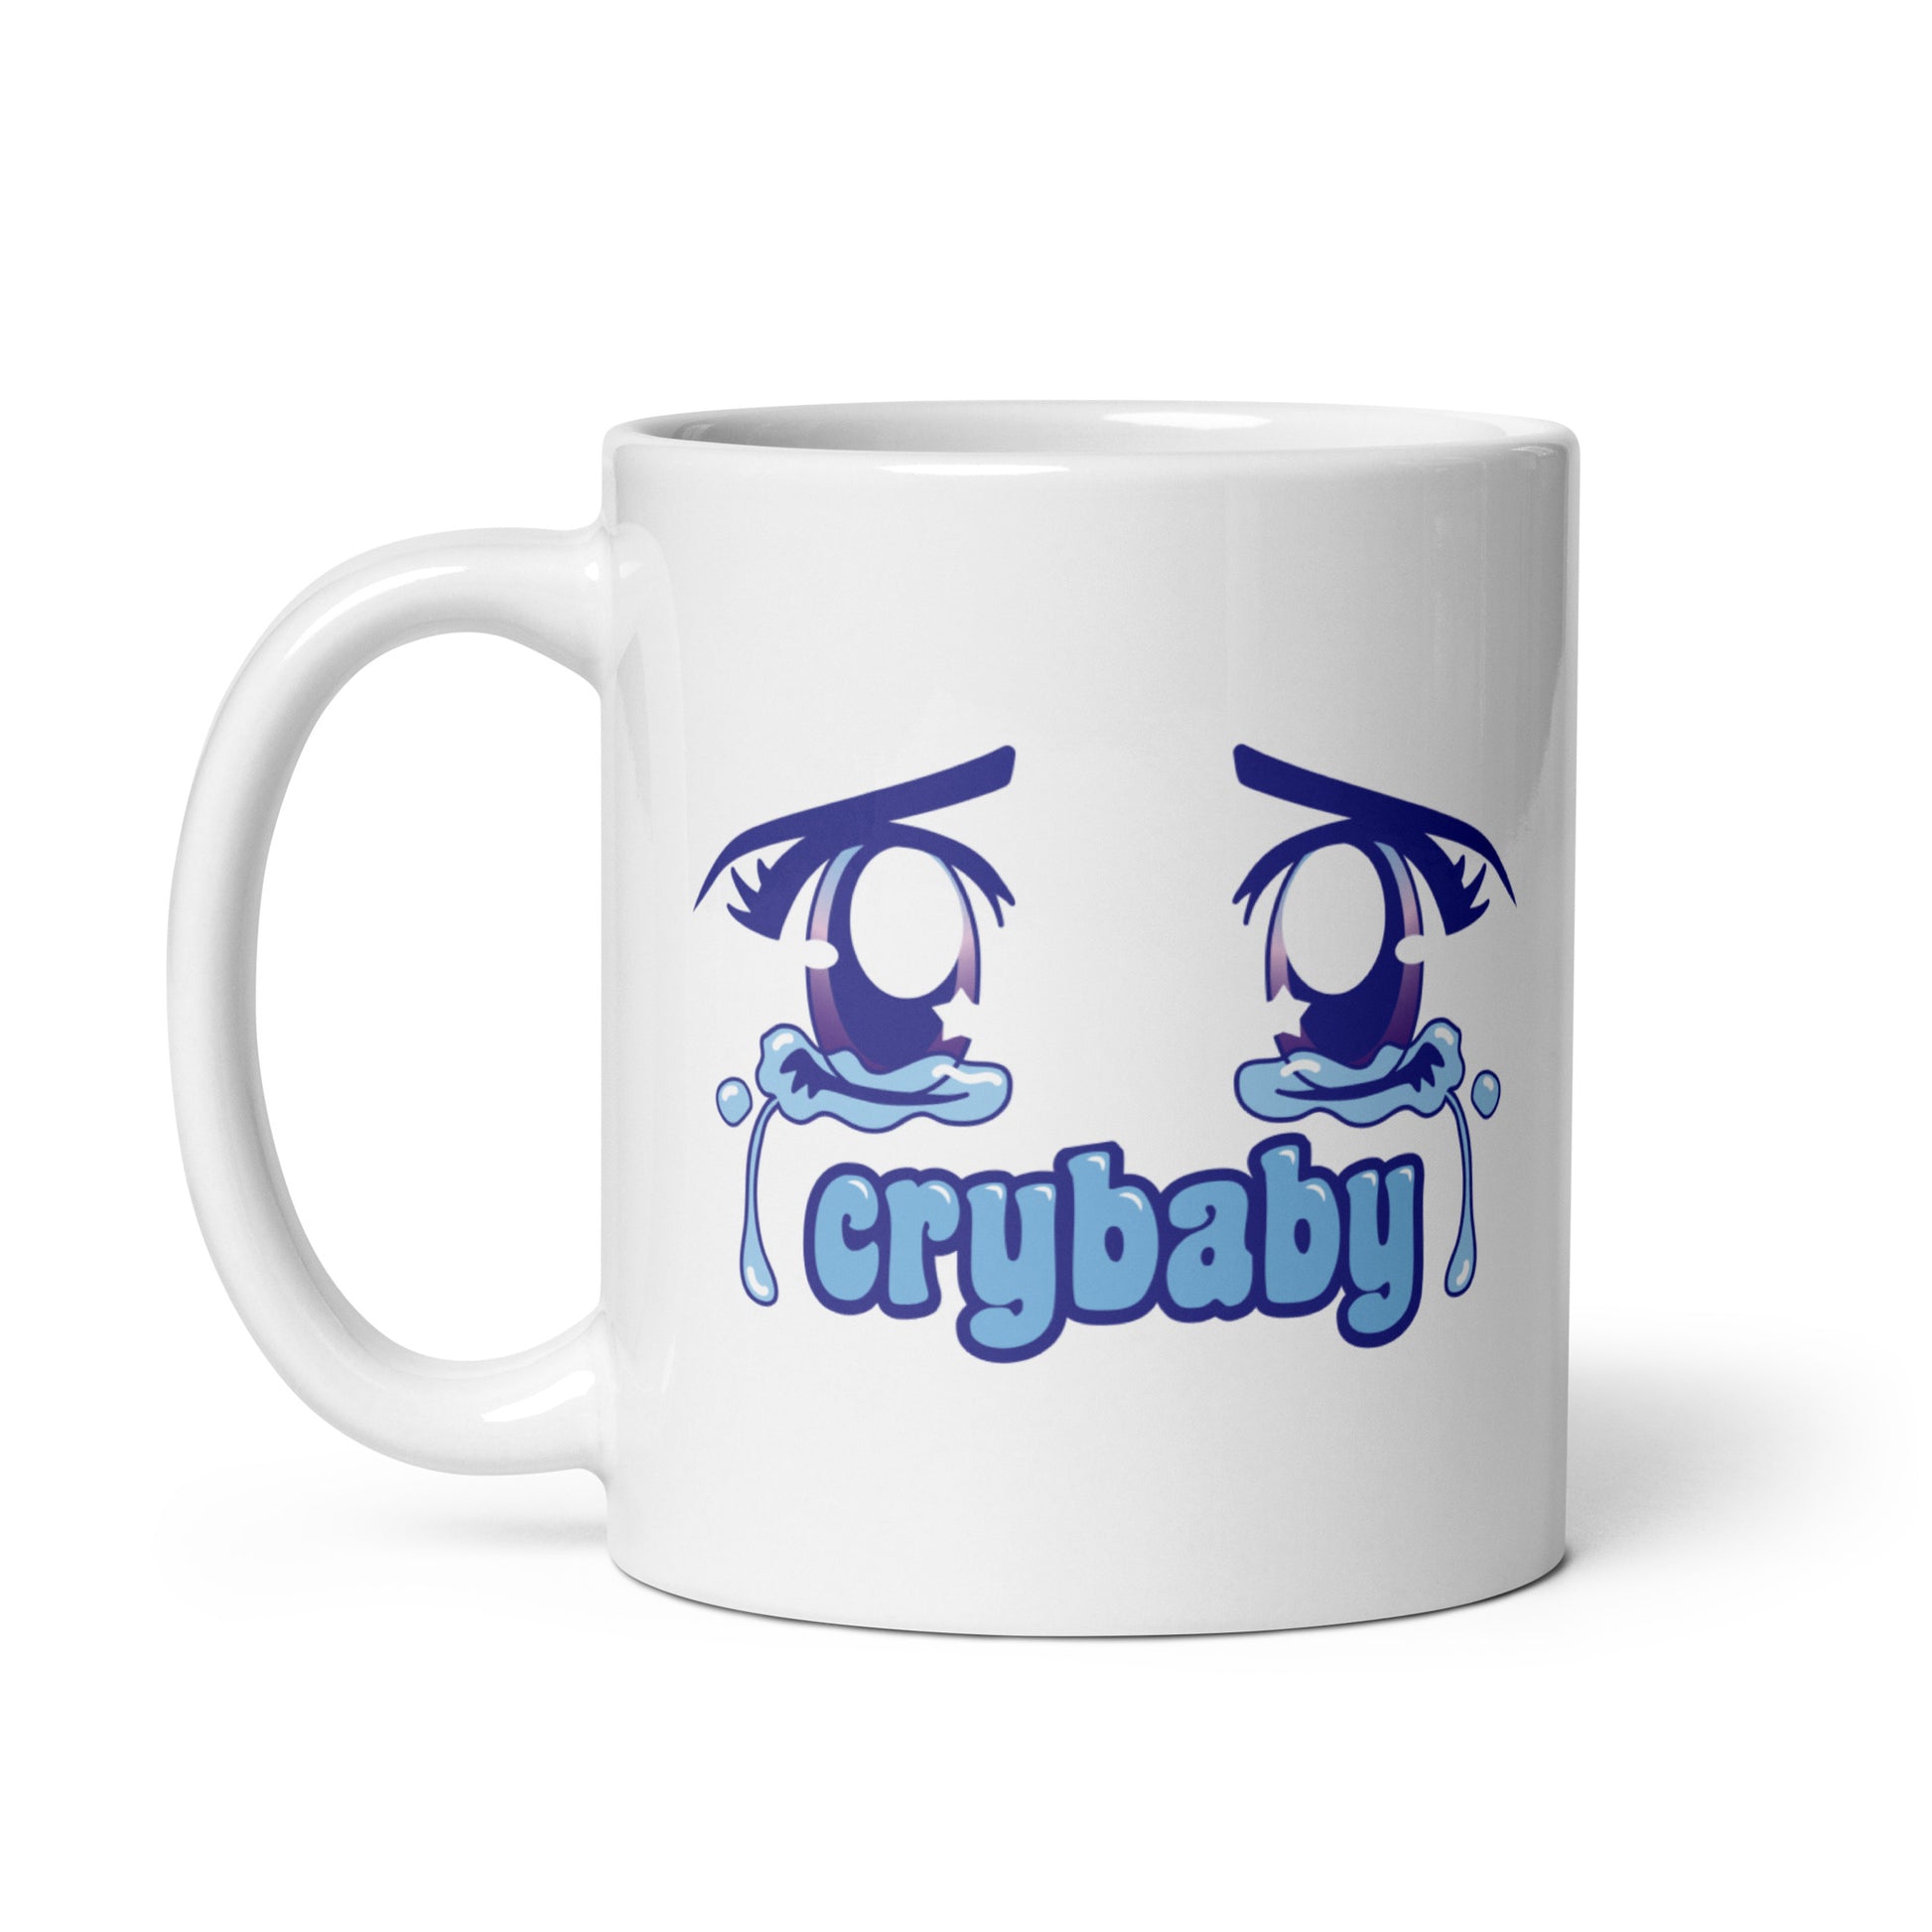 A white 11 ounce coffee mug featuring large, sparkling purple anime eyes with tears streaming down. Text underneath the eyes in a rounded blue font reads "crybaby"